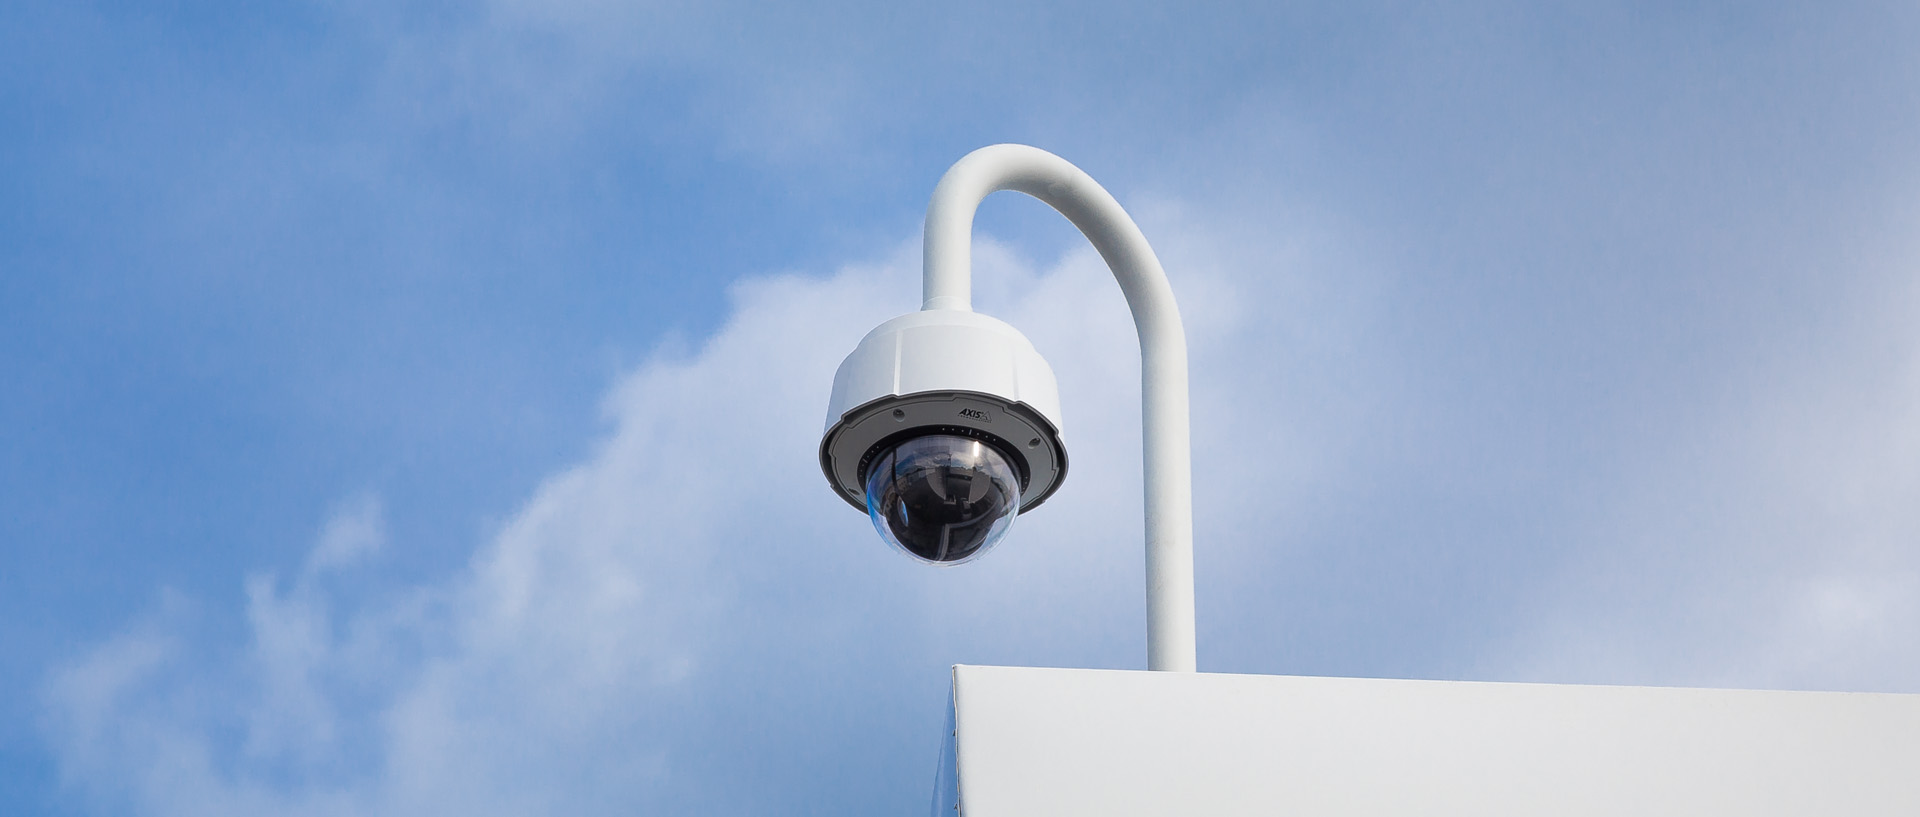 Learn more about Security Systems